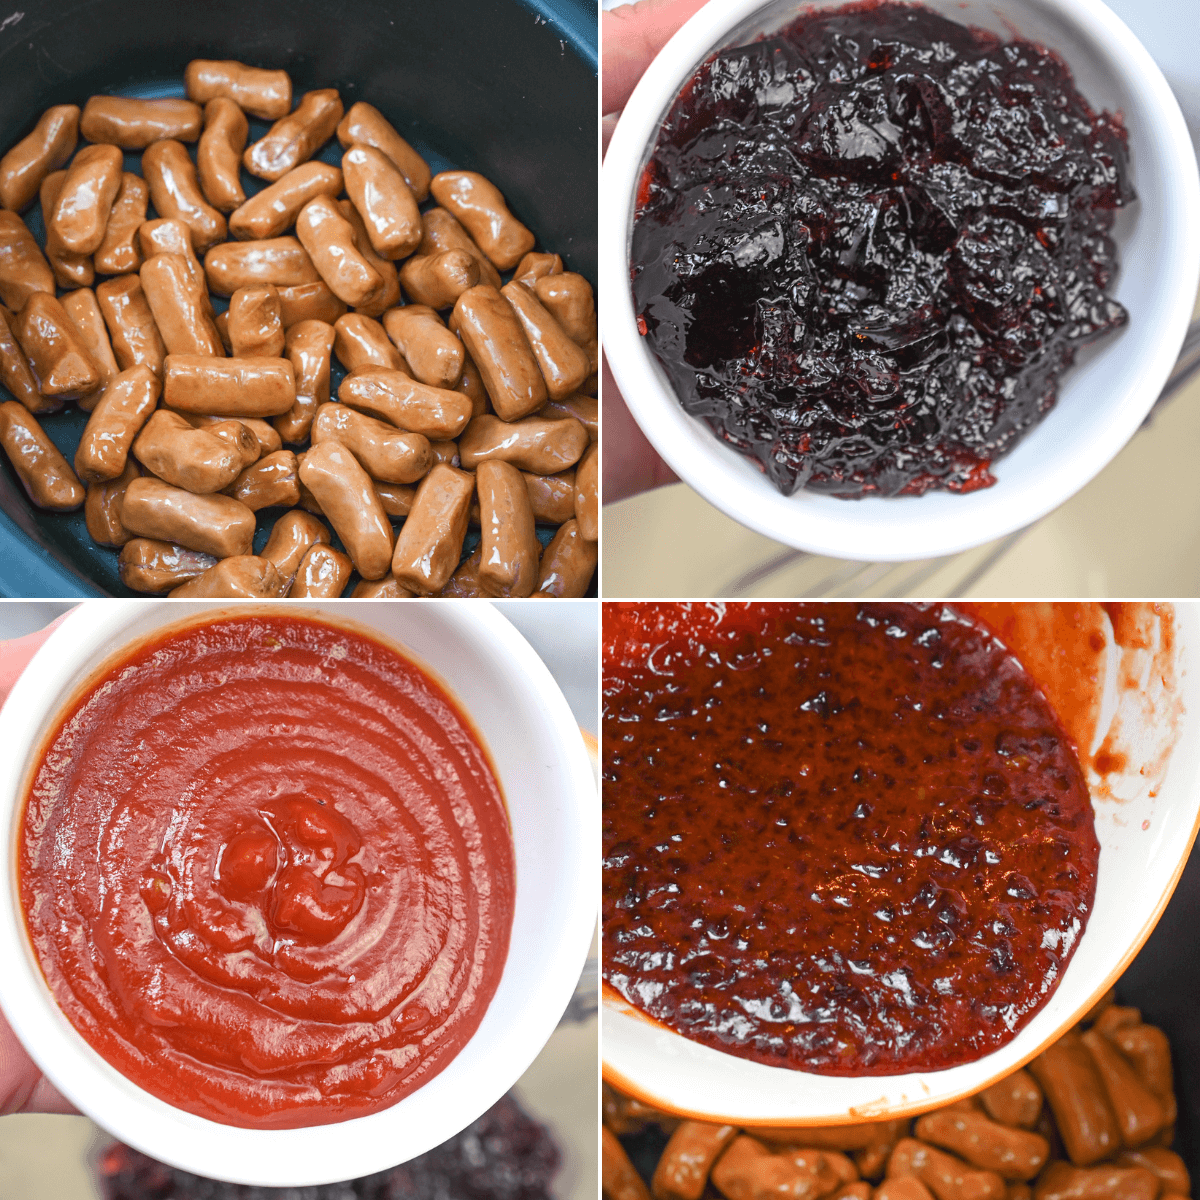 A series of photos showing the process of making the hot dogs and sauce.